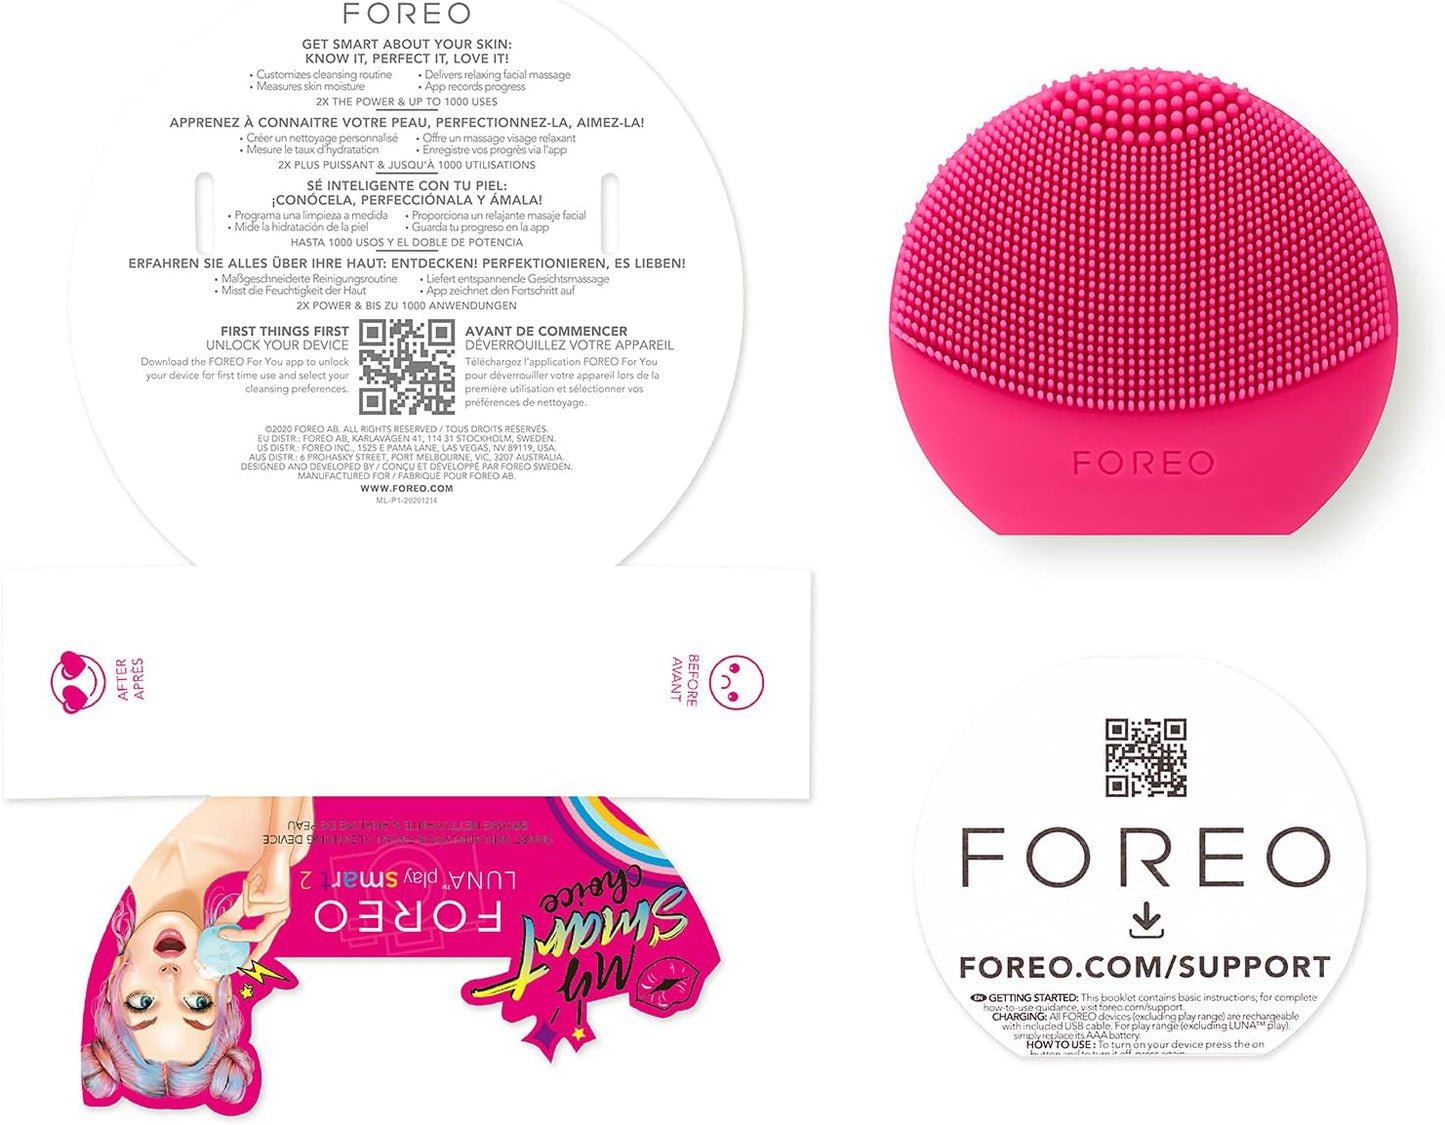 Load image into Gallery viewer, FOREO LUNA play smart 2 - Facial Cleansing Brush - 2-in-1 Skin Analysis &amp;amp; Facial Cleanser - Travel Accessories - Silicone Face Massager - Holiday Essentials - App-connected - Cherry Up
